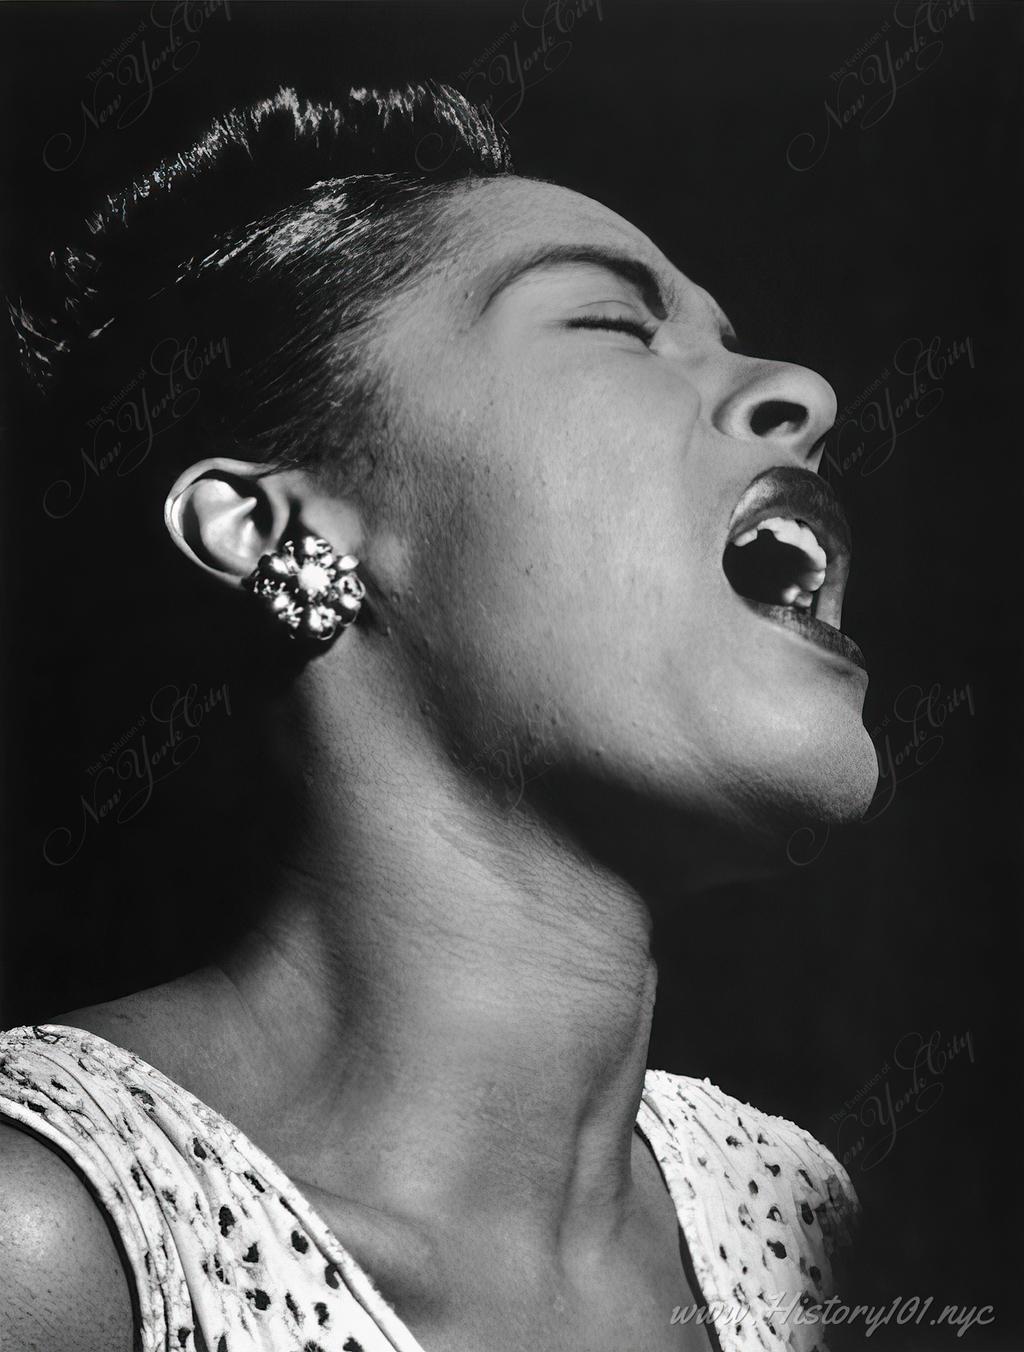 Discover Billie Holiday's influential 1947 jazz performance at Downbeat, immortalized in William P. Gottlieb's iconic photograph